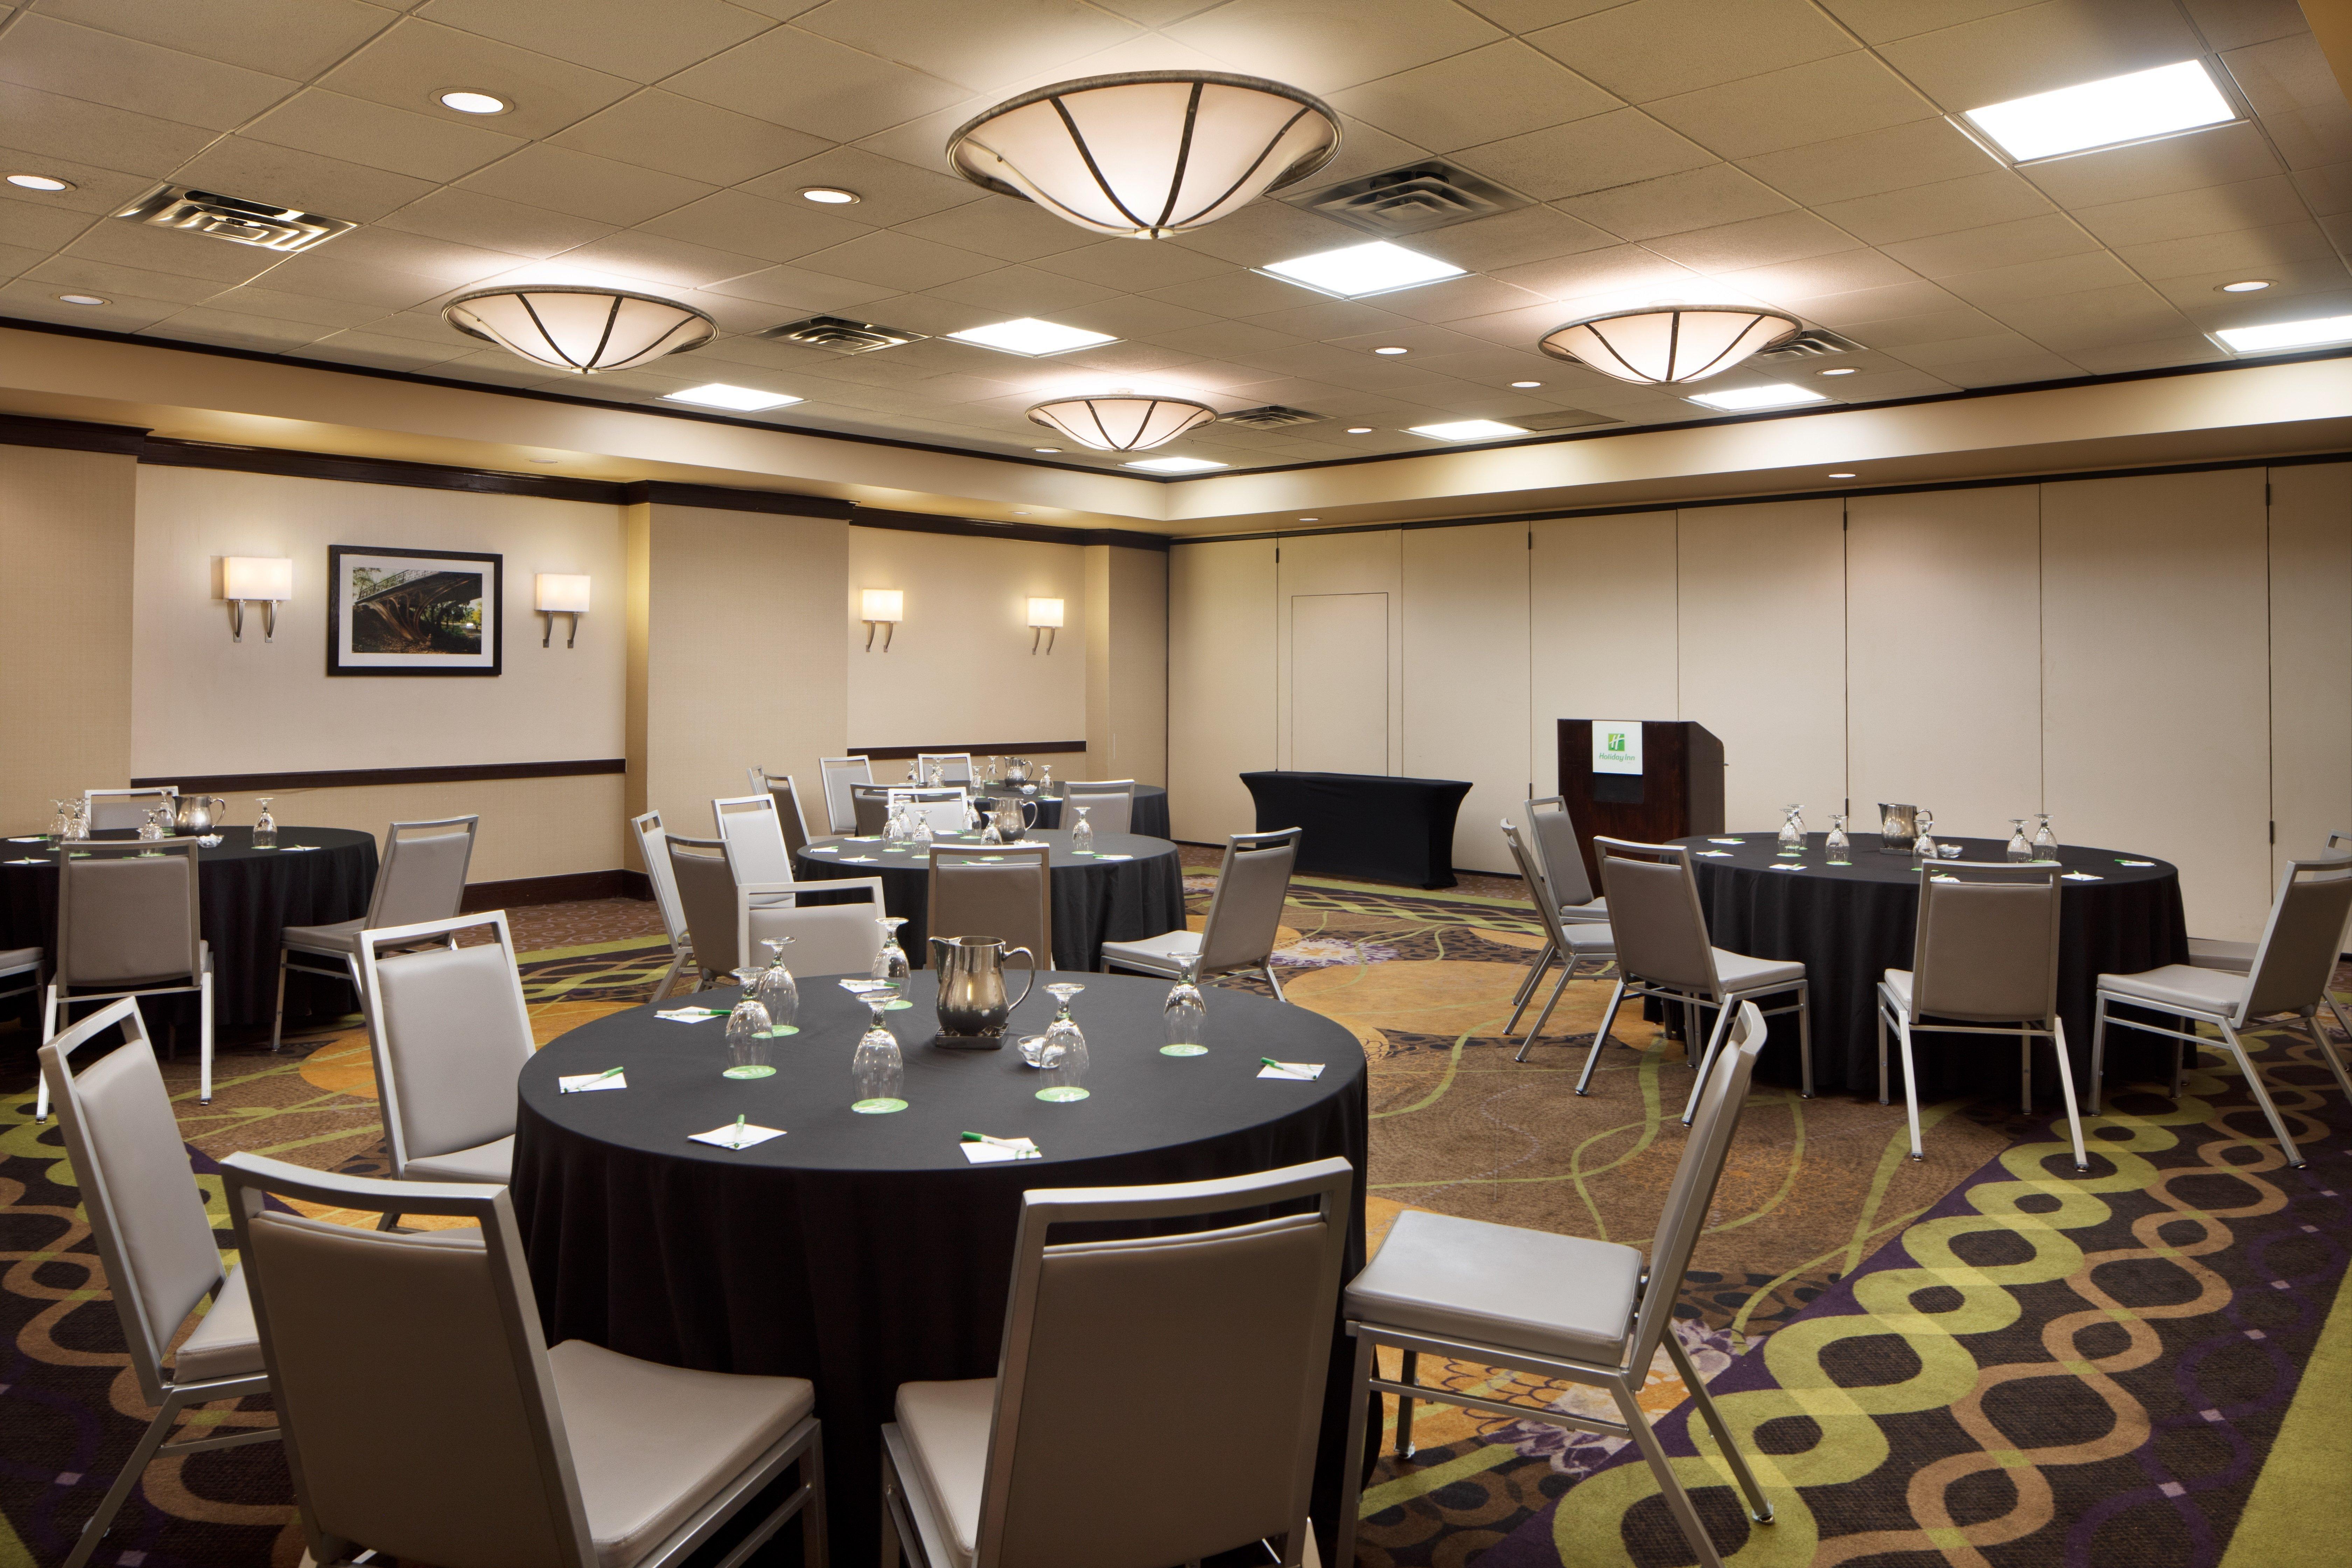 kruis Medic Controle HOTEL HOLIDAY INN CLARK - NEWARK AREA CLARK, NJ 4* (United States) - from  US$ 119 | BOOKED